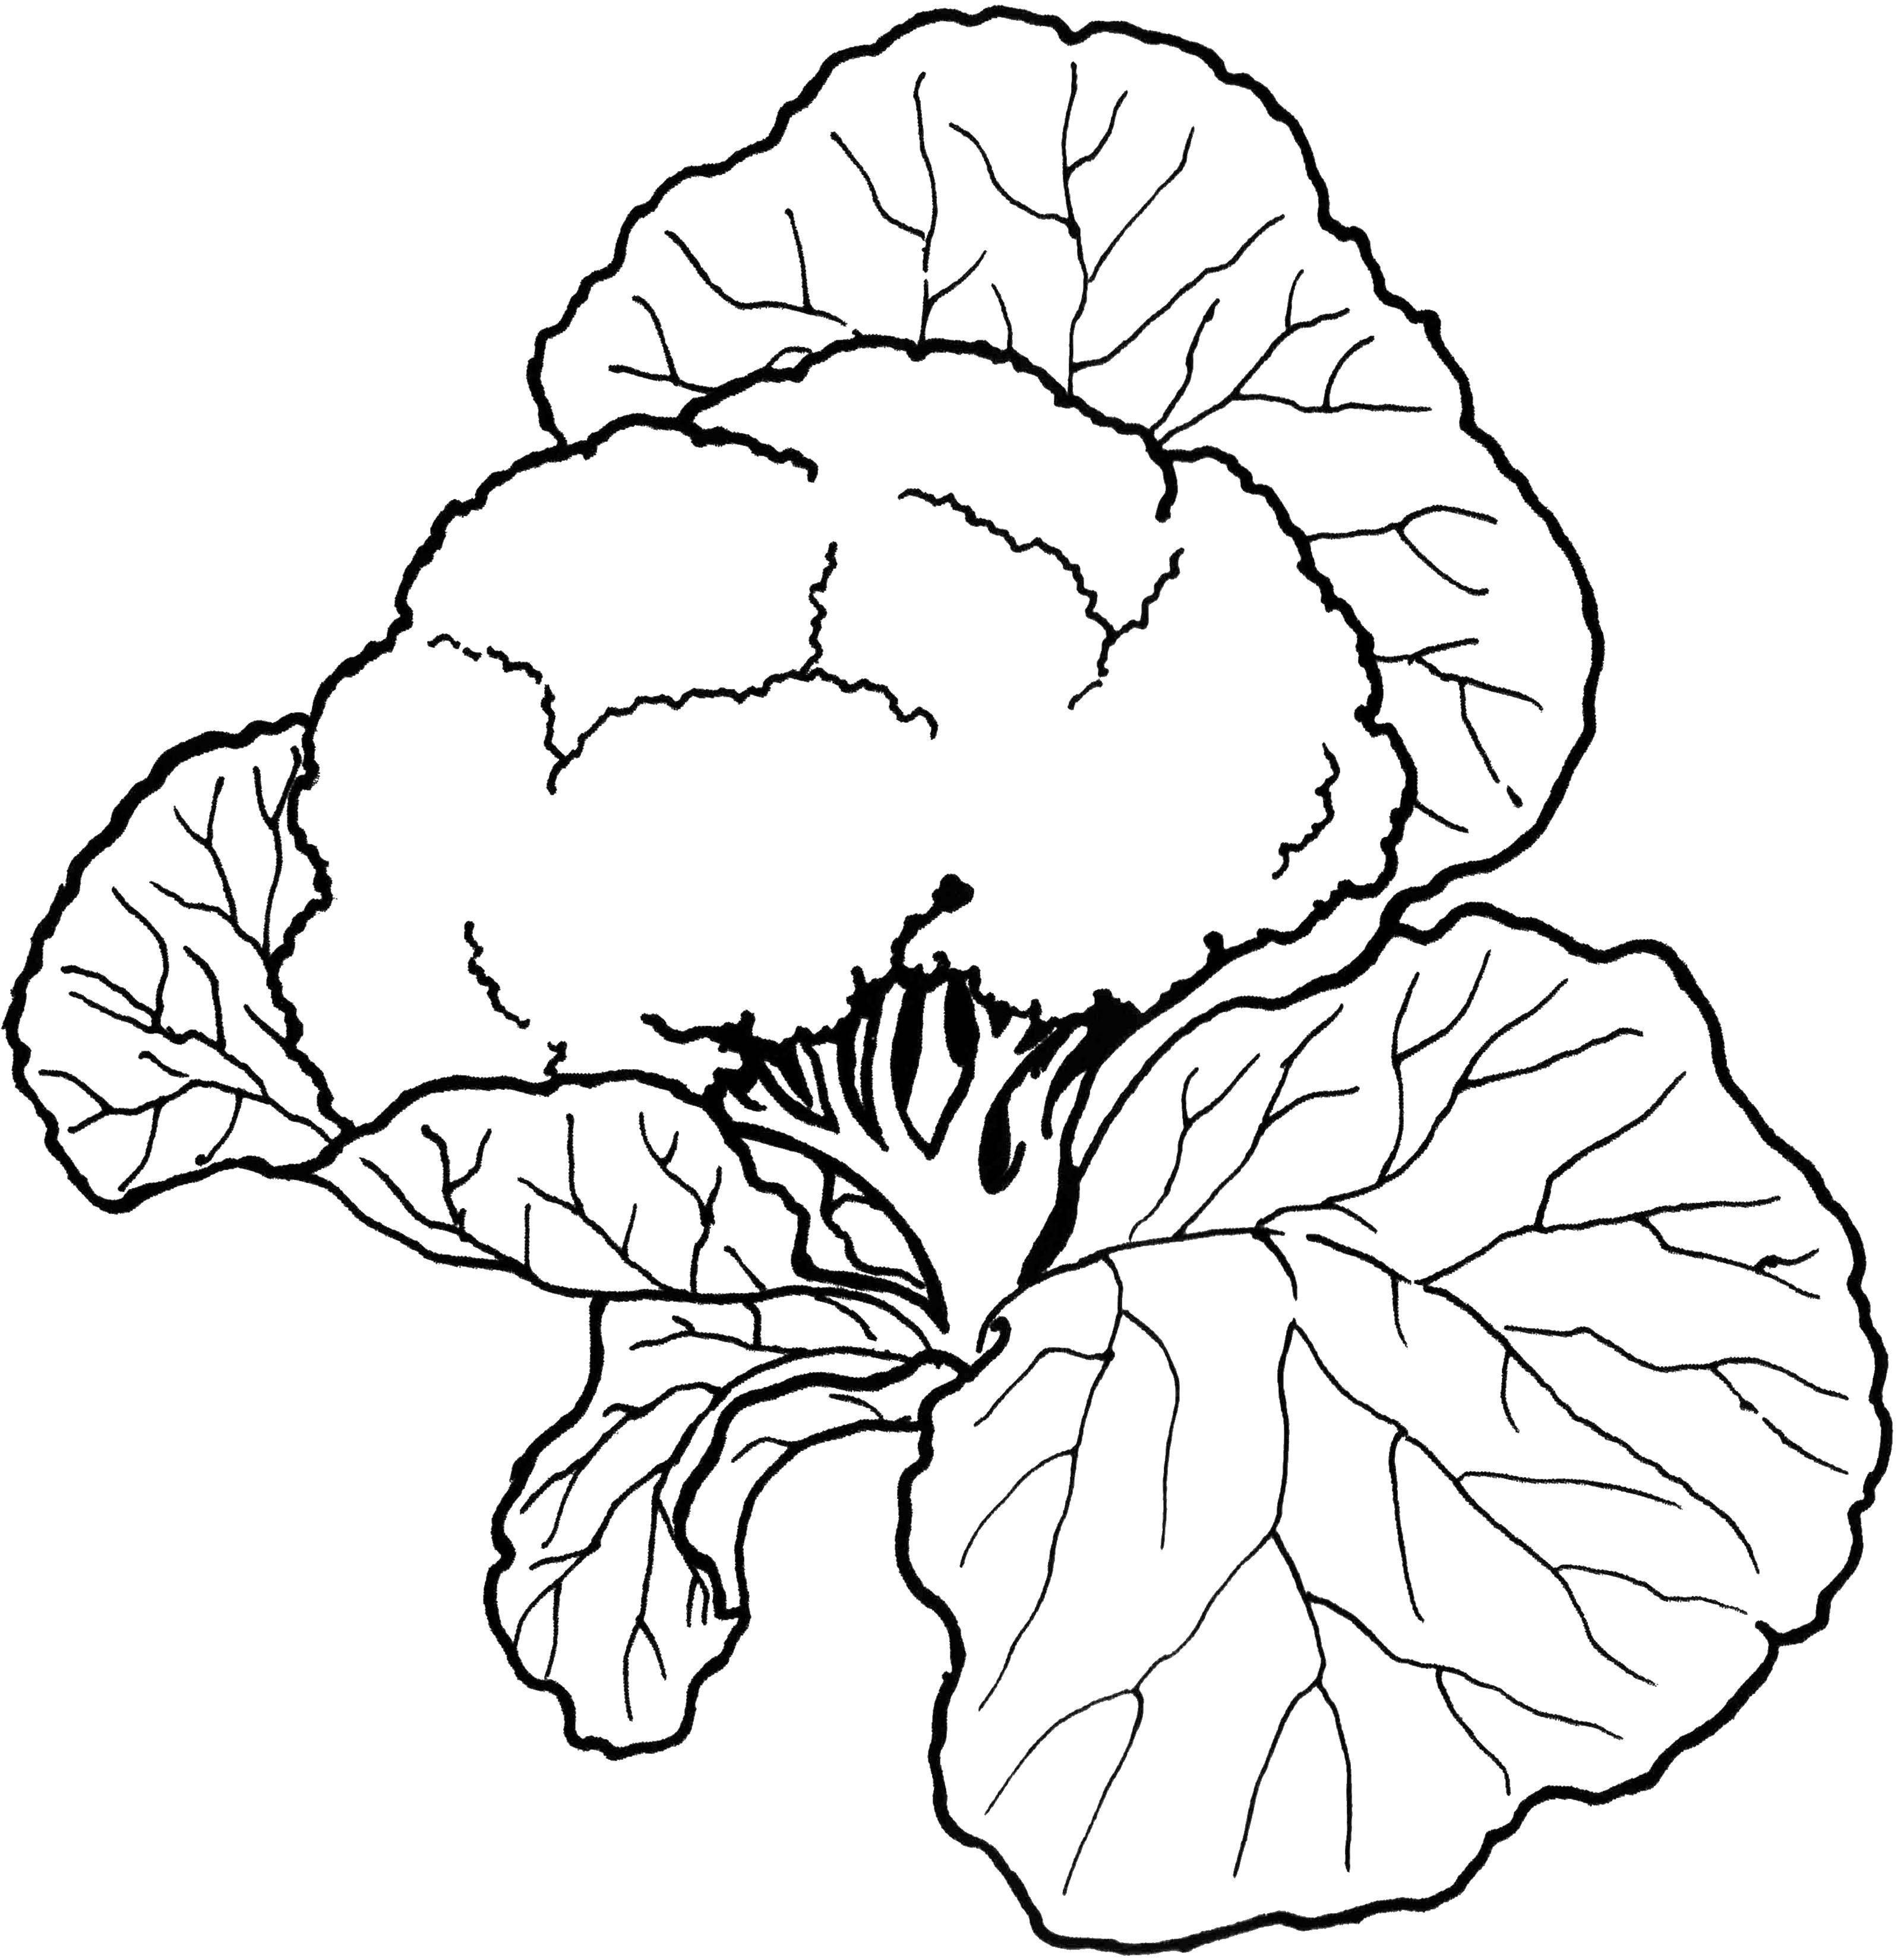 Coloring Broccoli. Category Vegetables in English. Tags:  English, vegetables.